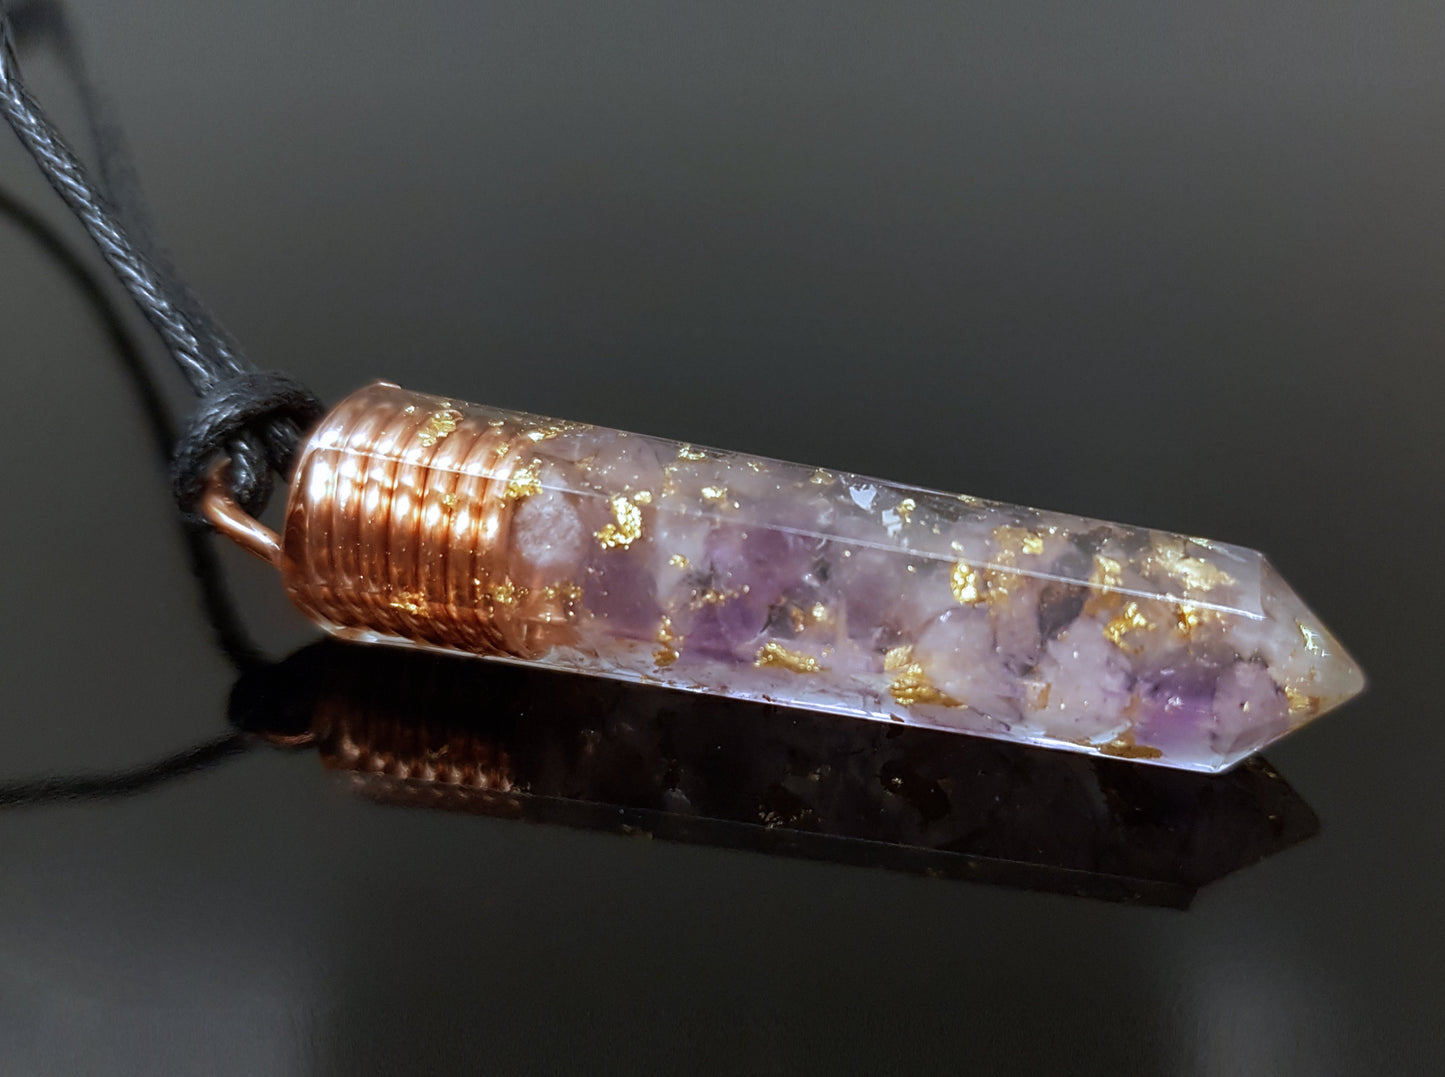 Amethyst Orgonite orgone pendant necklace. Reiki infused amulet, 24k gold and copper, chakra healing, EMF protection